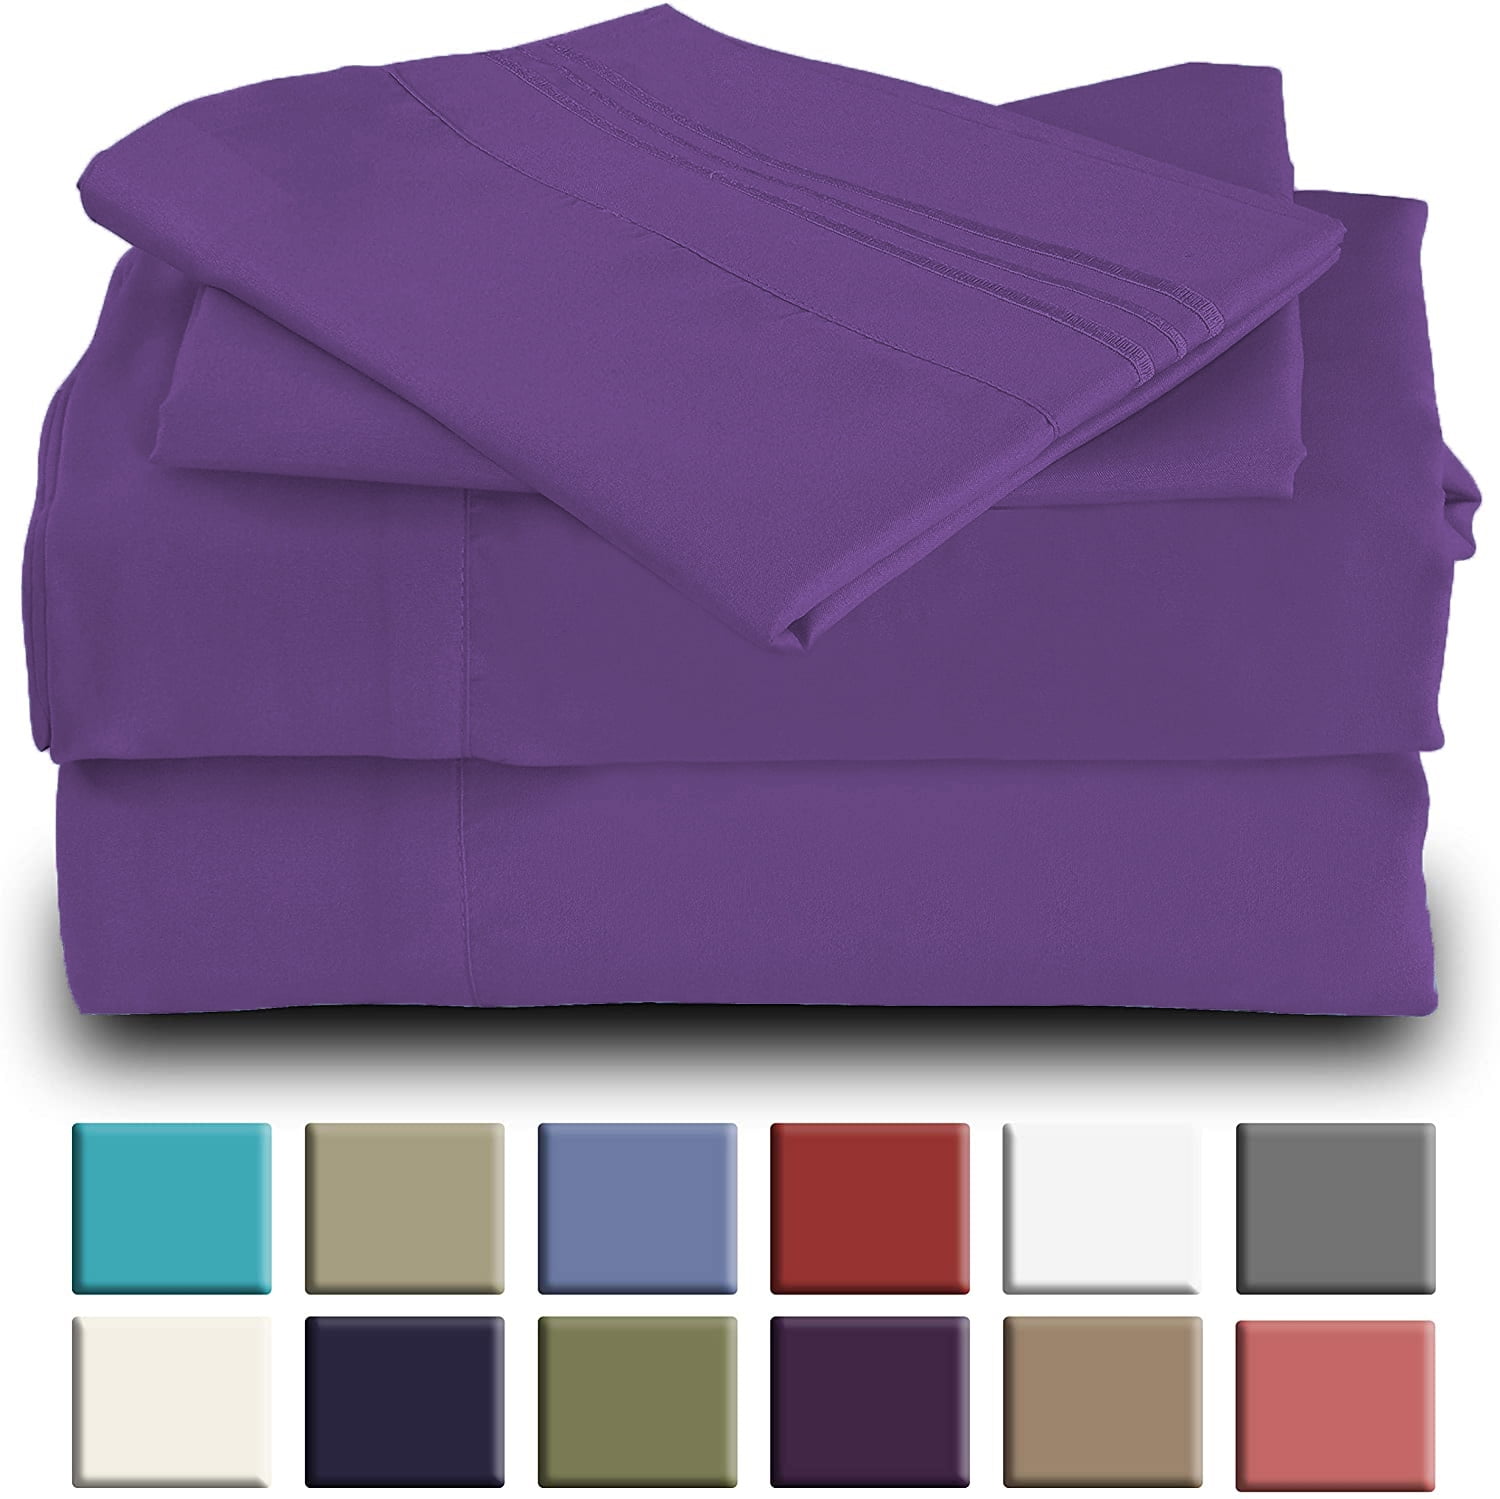 Queen-King-Full-Twin-Split K SOFT-COOL-Deep Pocket COMFY BAMBOO SHEETS Luxury 